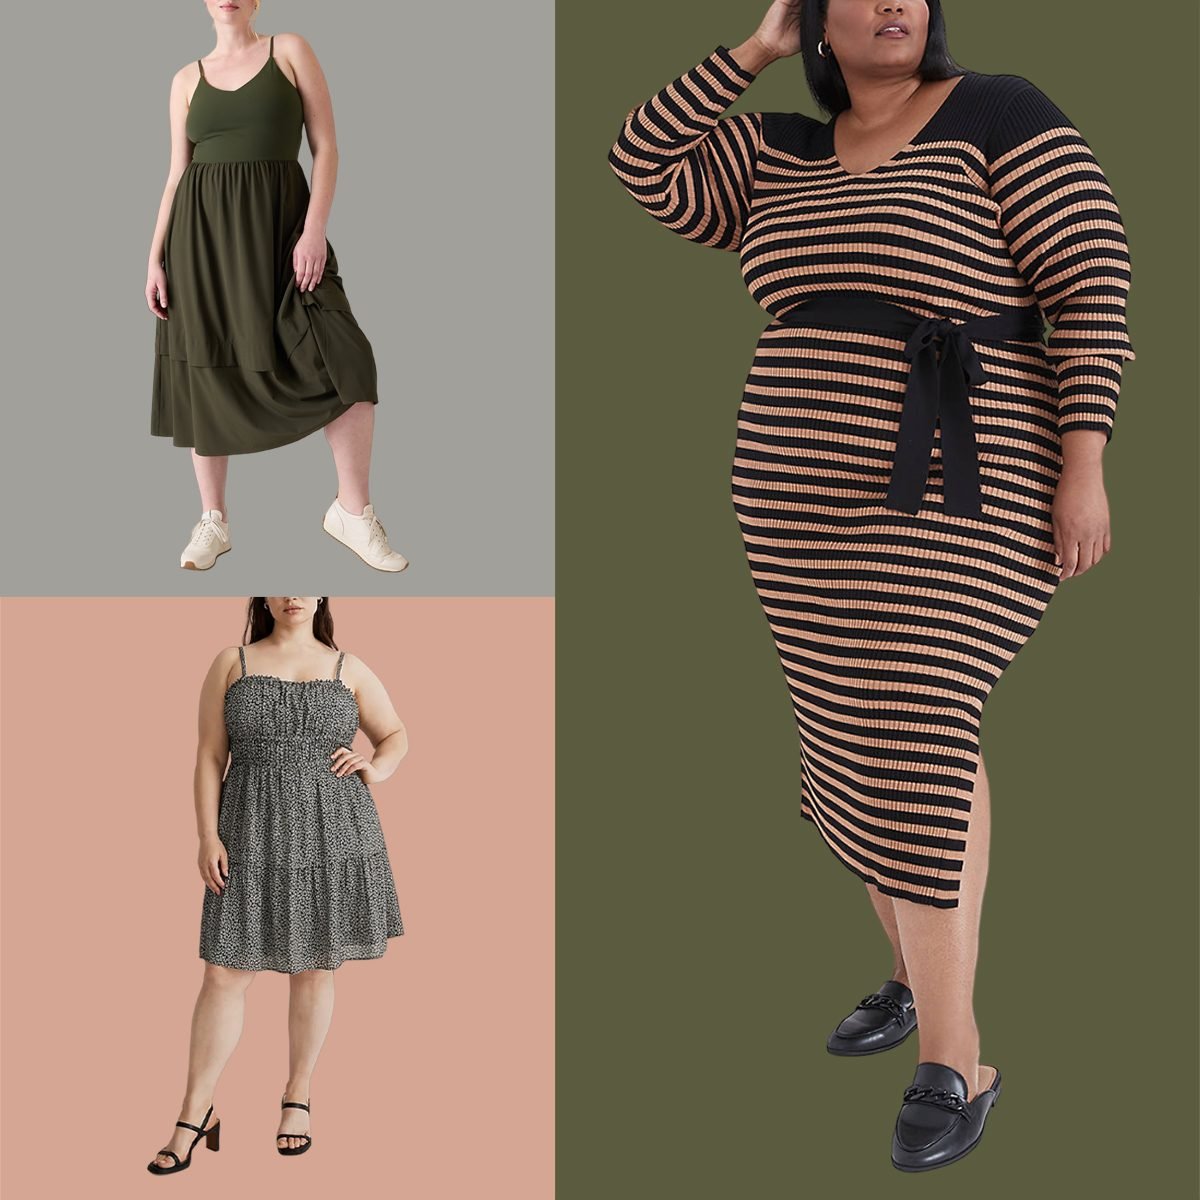 Plus Size Legging Outfits: 7 Adorable Options You Need - The Plus Life